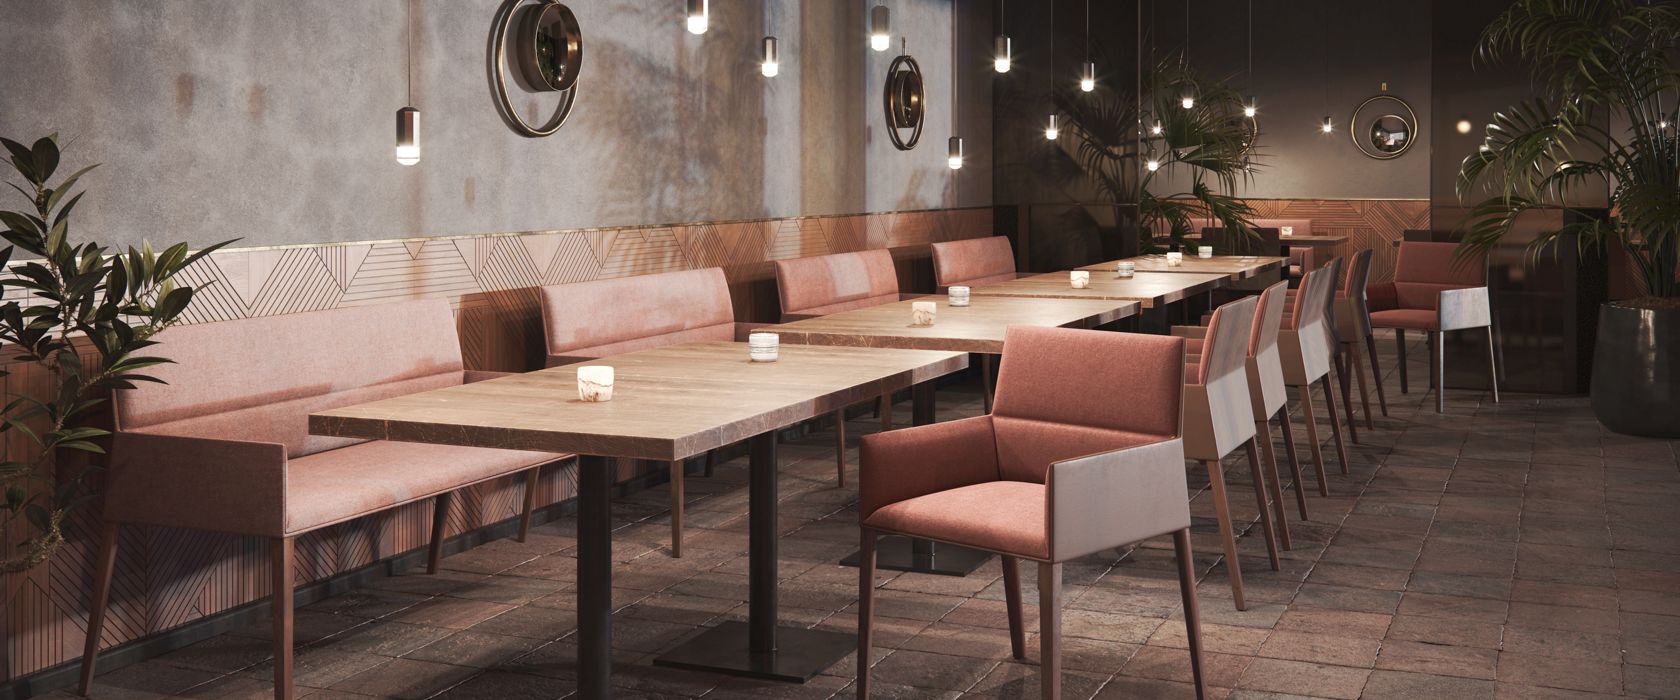 Furniture for Your Restaurant